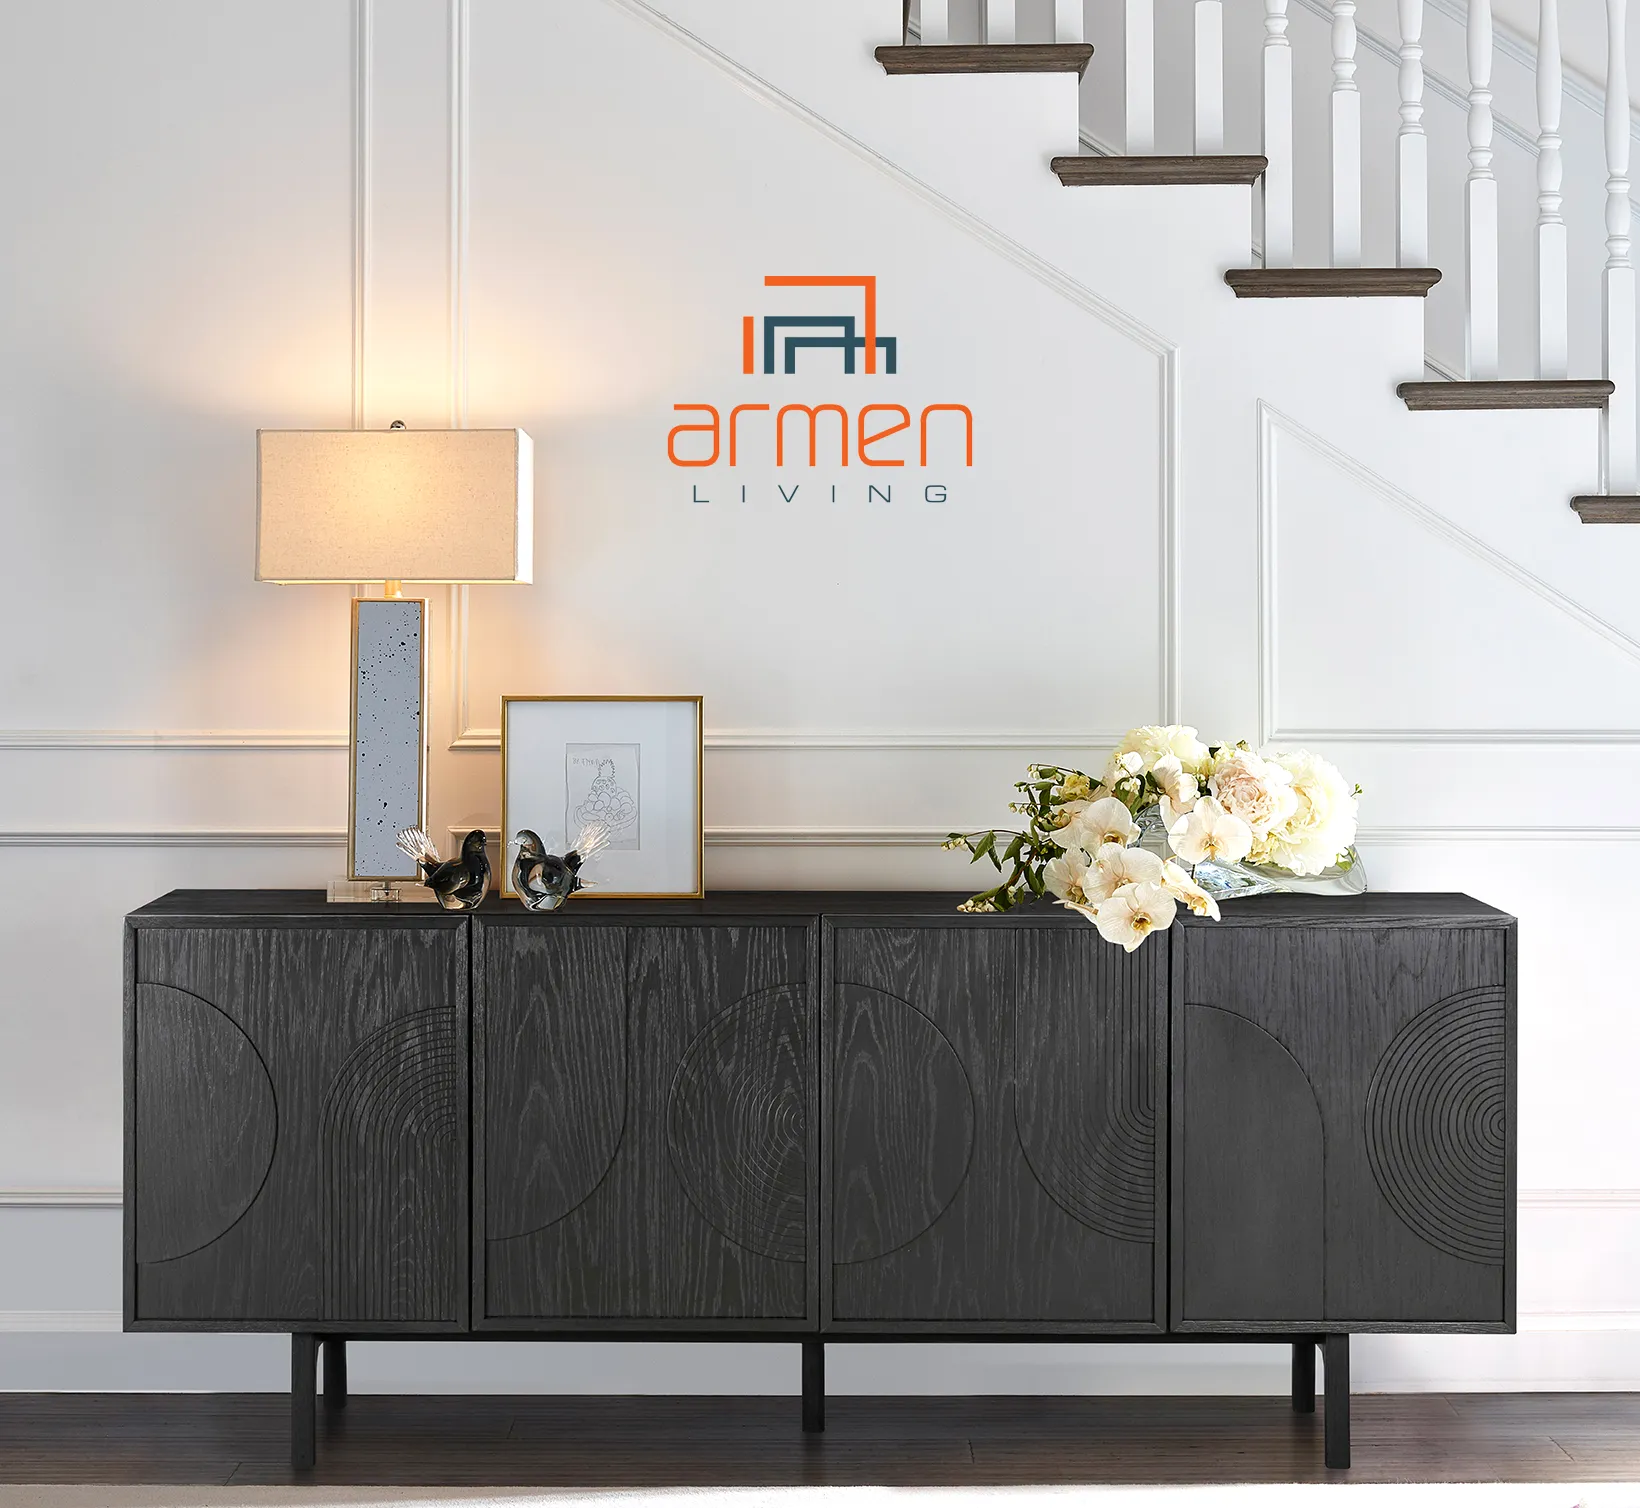 Shop Homethreads for the Best Selection and Value on Armen Living furniture